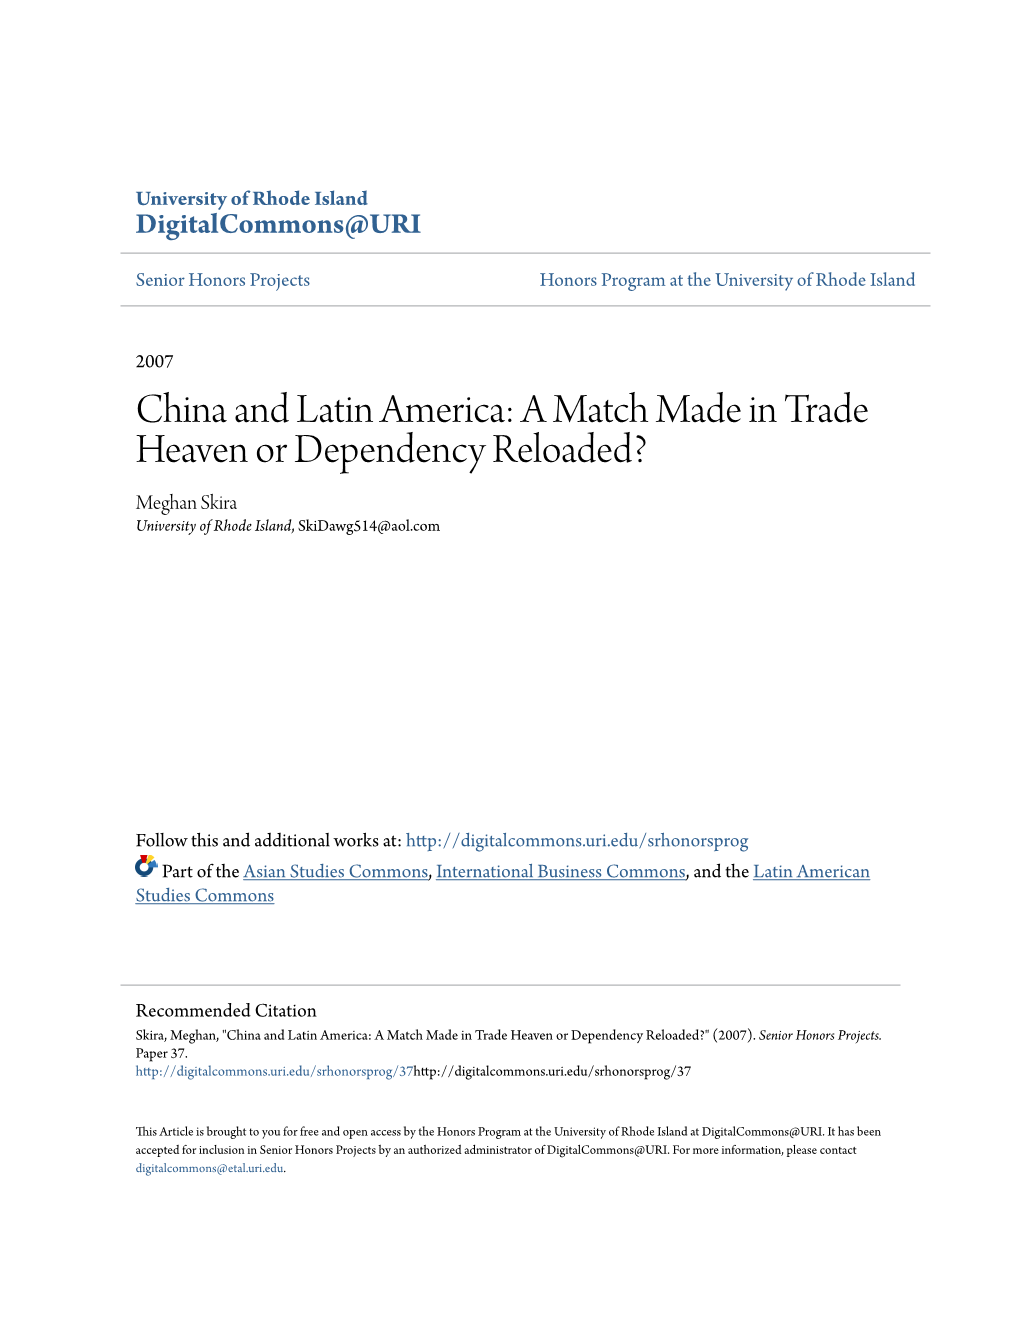 China and Latin America: a Match Made in Trade Heaven Or Dependency Reloaded? Meghan Skira University of Rhode Island, Skidawg514@Aol.Com